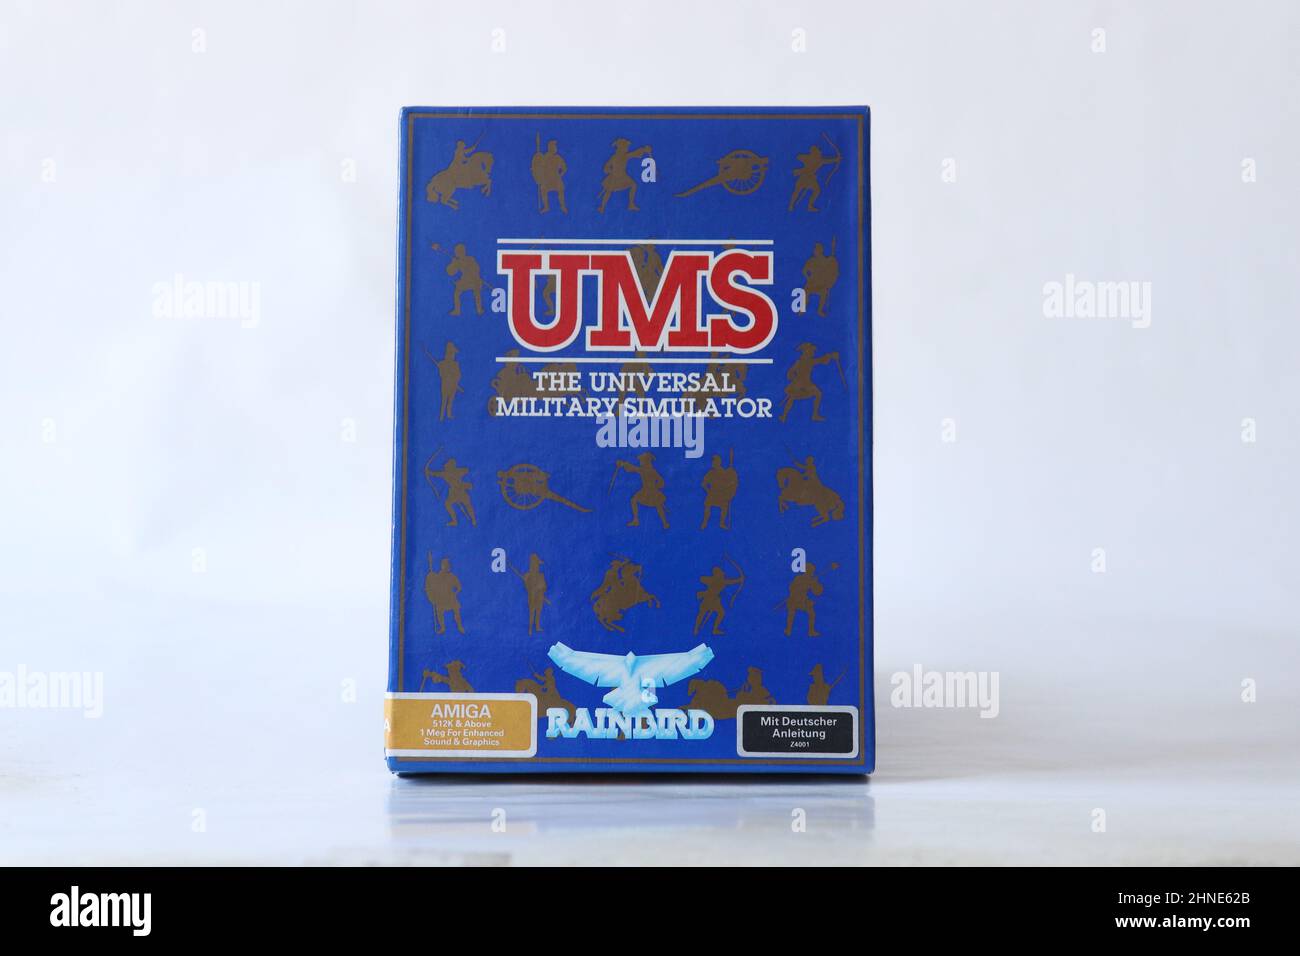 BERLIN - FEBRUARY 12, 2022: Vintage Retro Video Game UMS - THE UNIVERSAL MILITARY SIMULATOR for the Commodore Amiga on Floppy Disks. Rainbird released Stock Photo